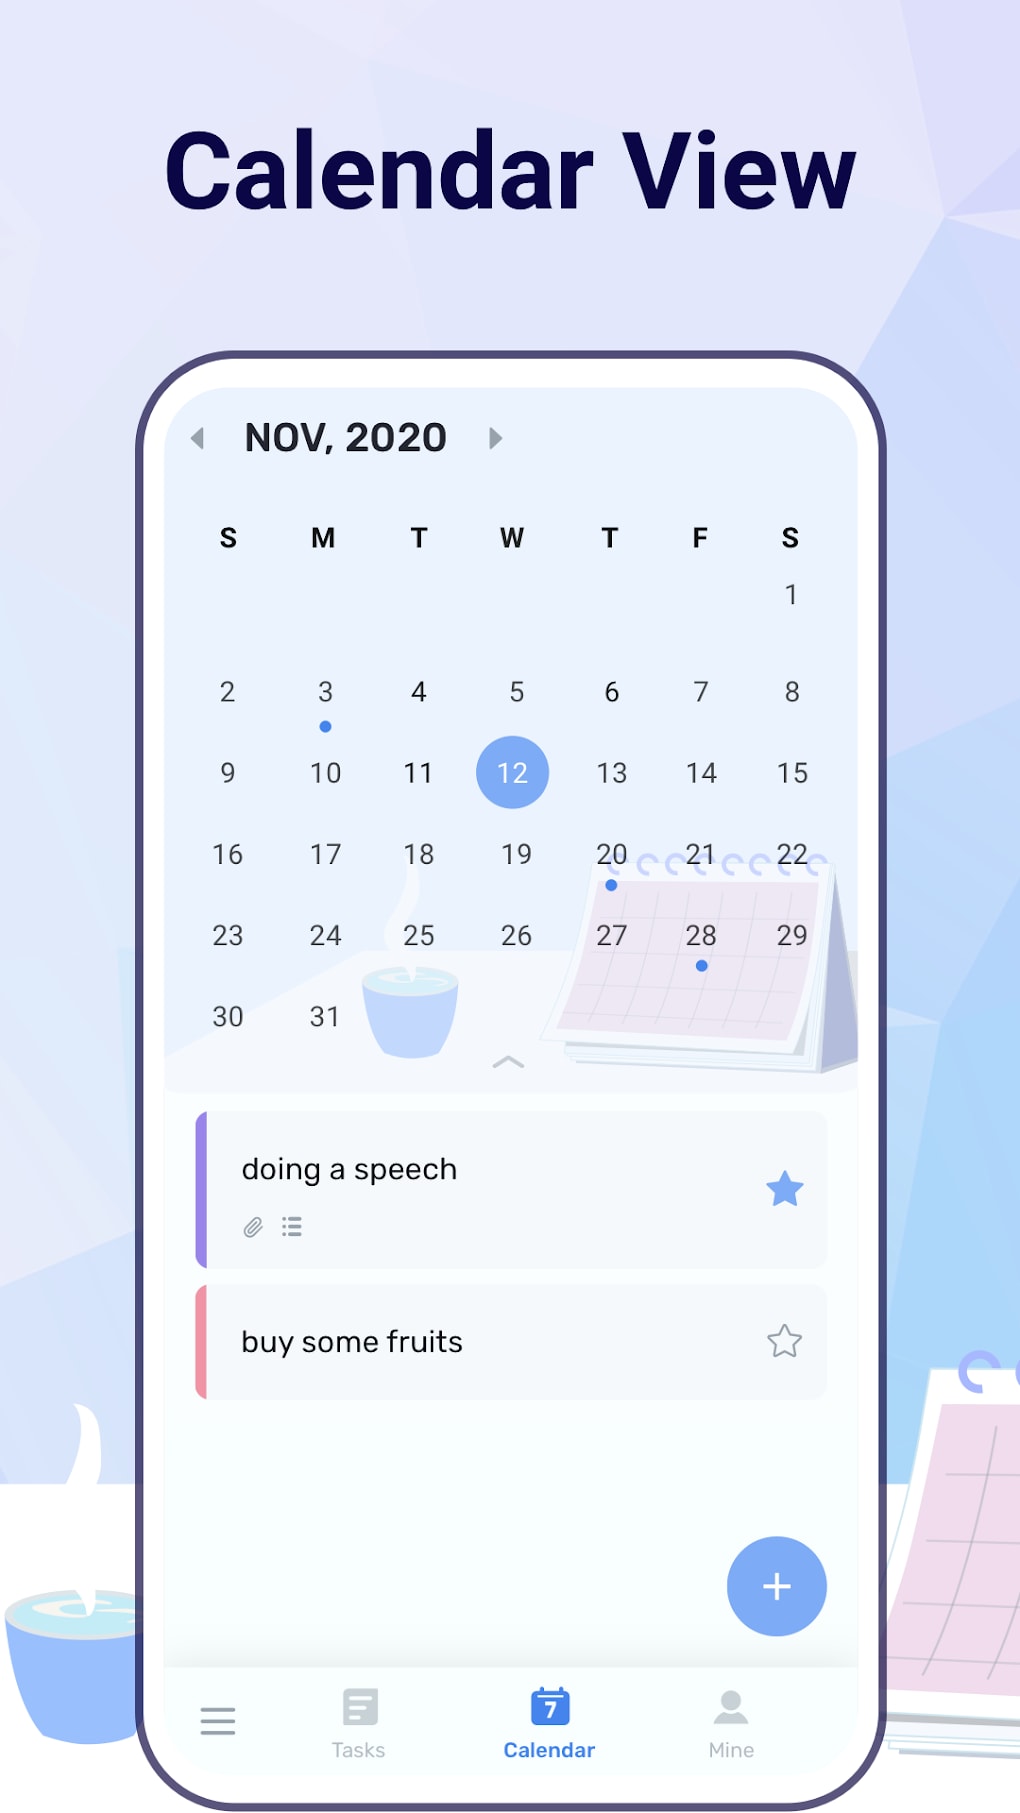 To-Do List - Schedule Planner - Apps on Google Play